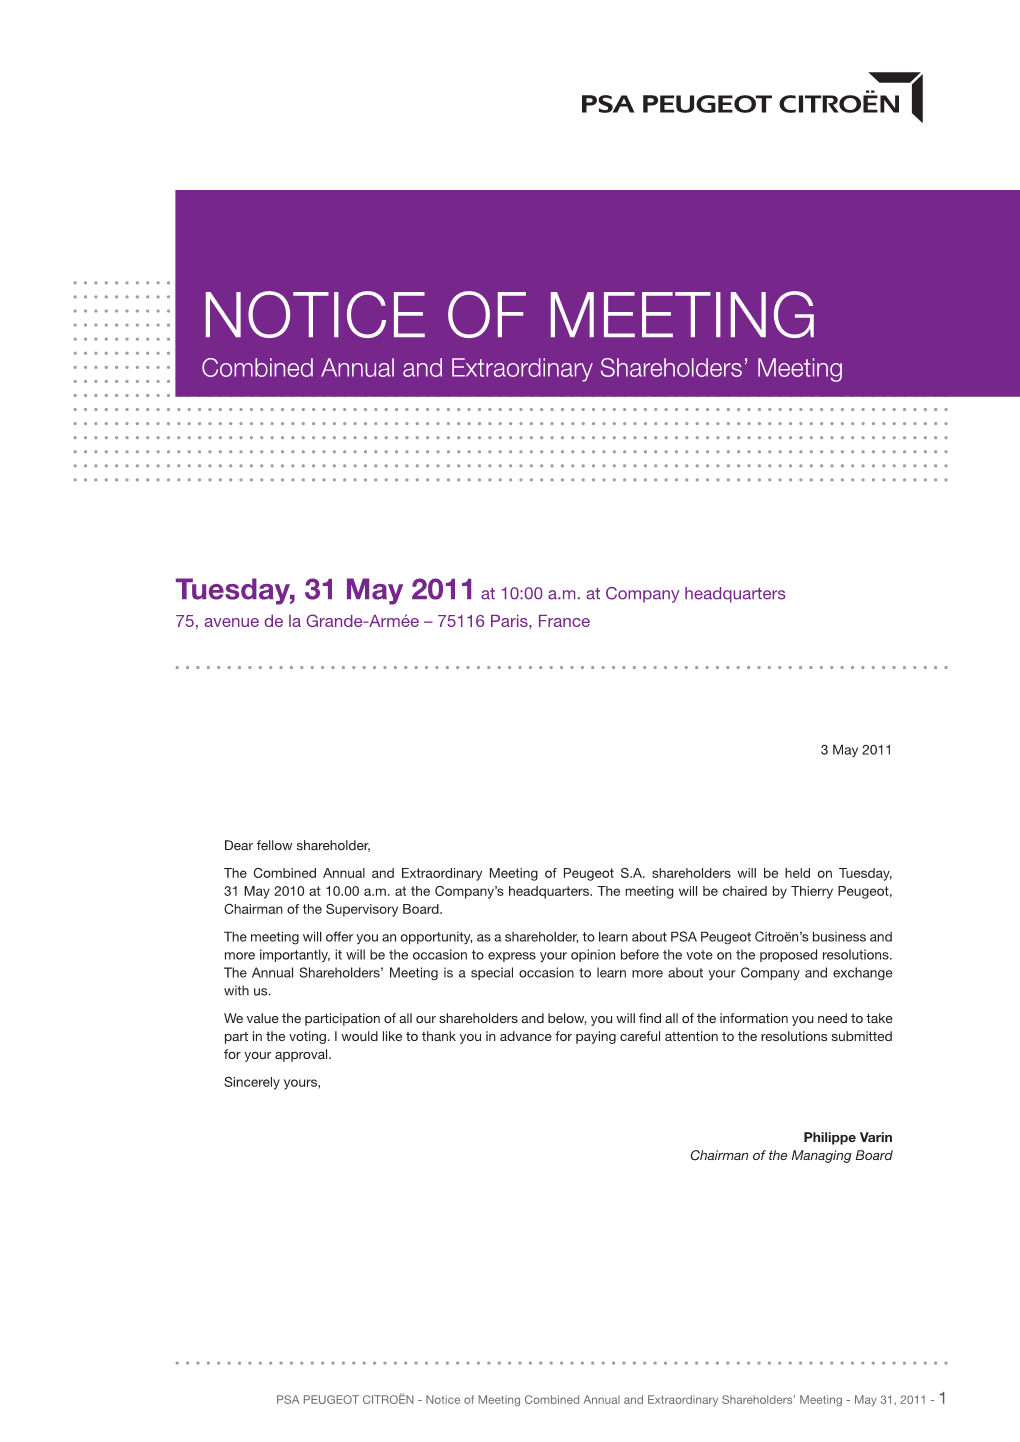 NOTICE of MEETING Combined Annual and Extraordinary Shareholders’ Meeting